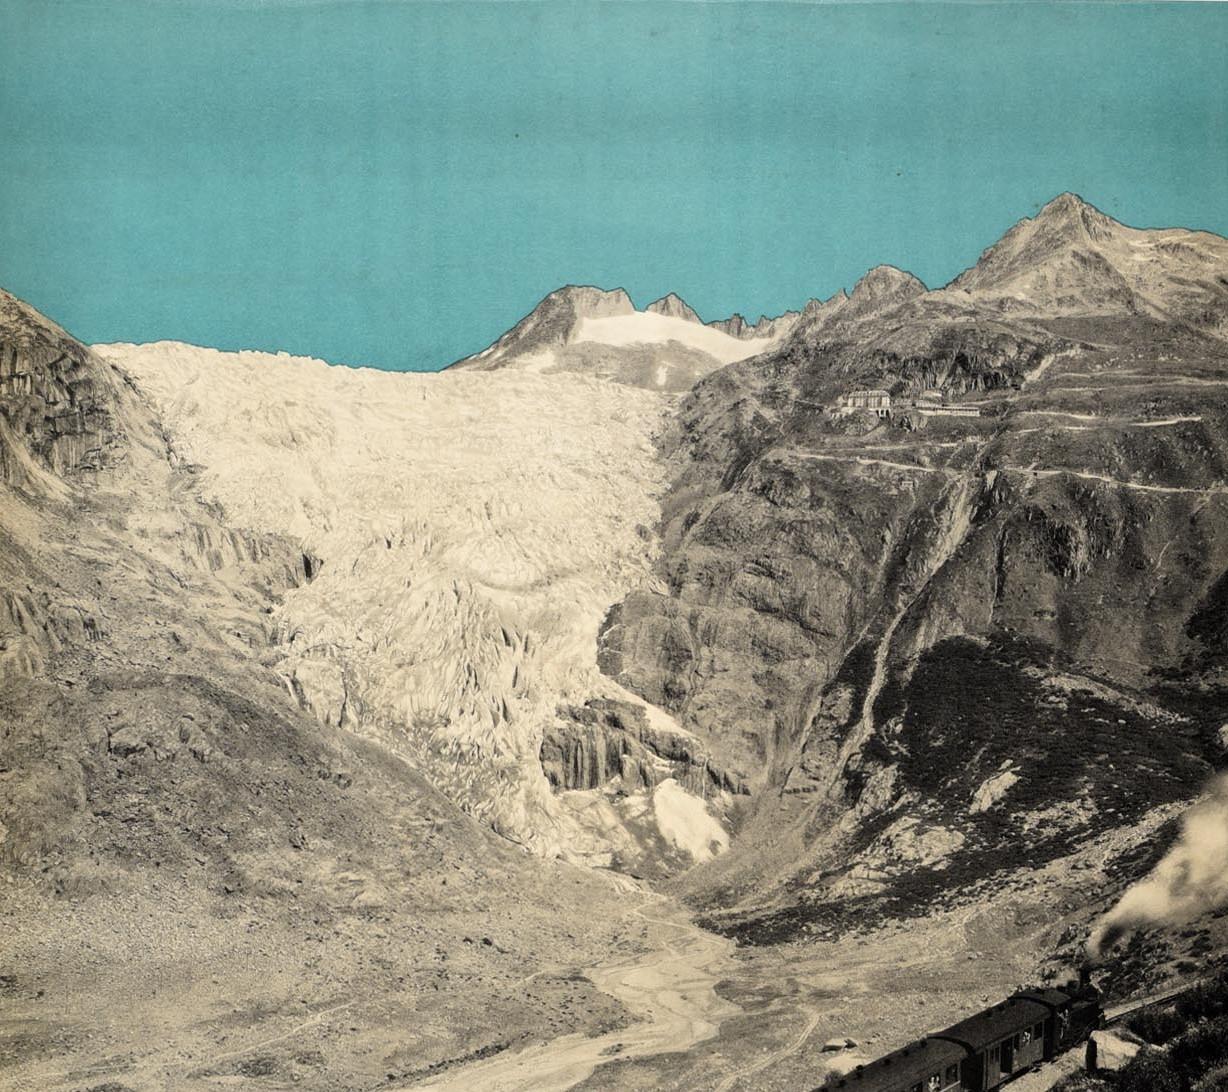 Original vintage travel poster for the Furka Oberalp mountain railway in Switzerland that connects the Rhone to the Rhine (the first part of the railway line from Brig to Gletsch opened in 1914) featuring a scenic black and white view of passengers